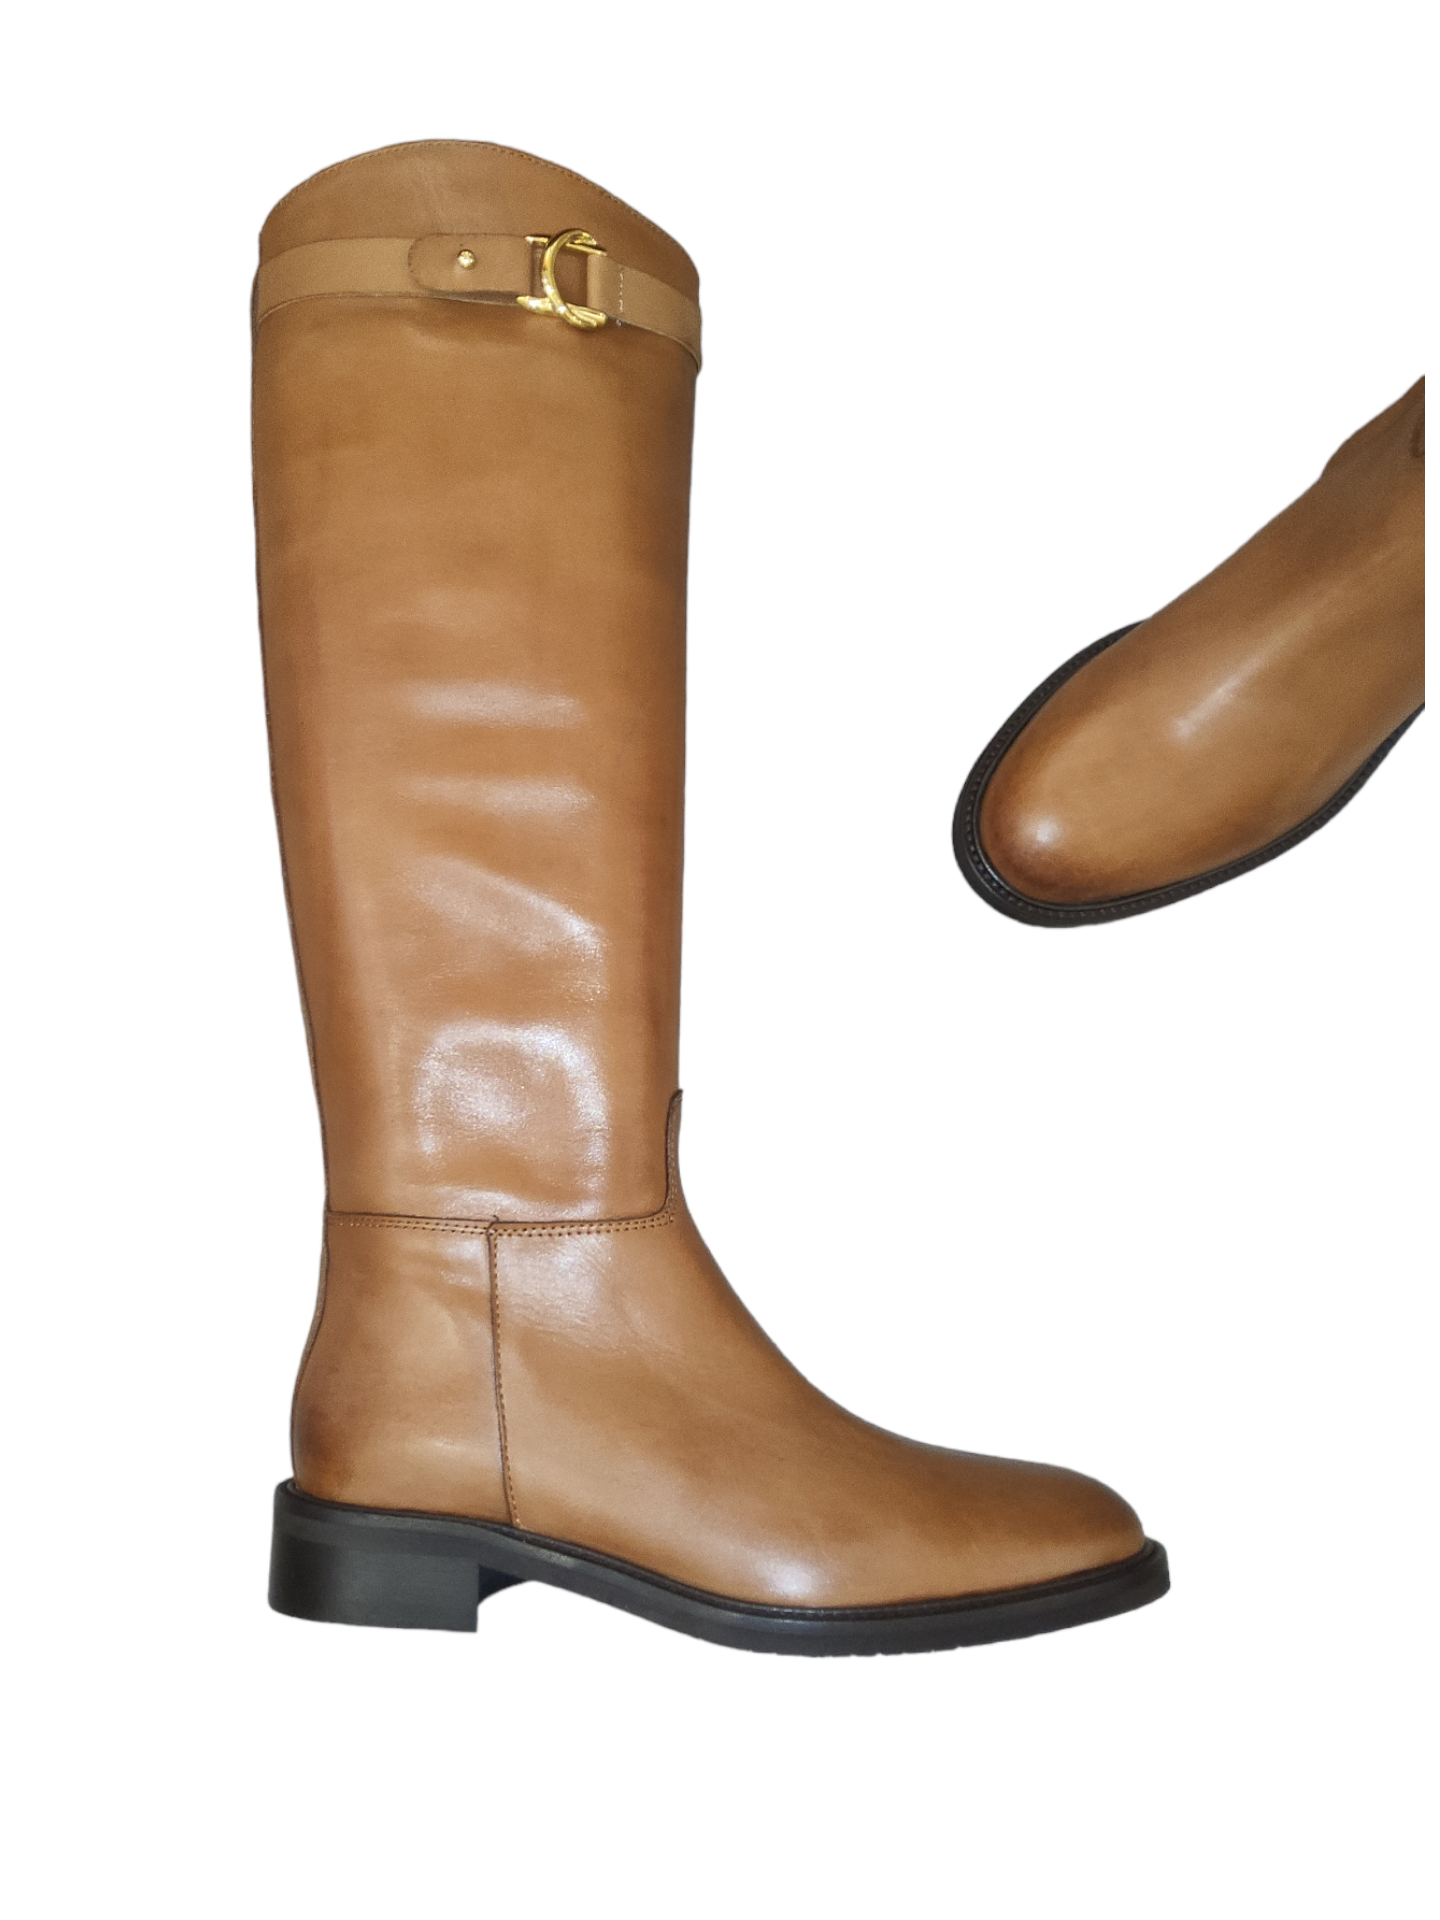 Tan leather knee high boots